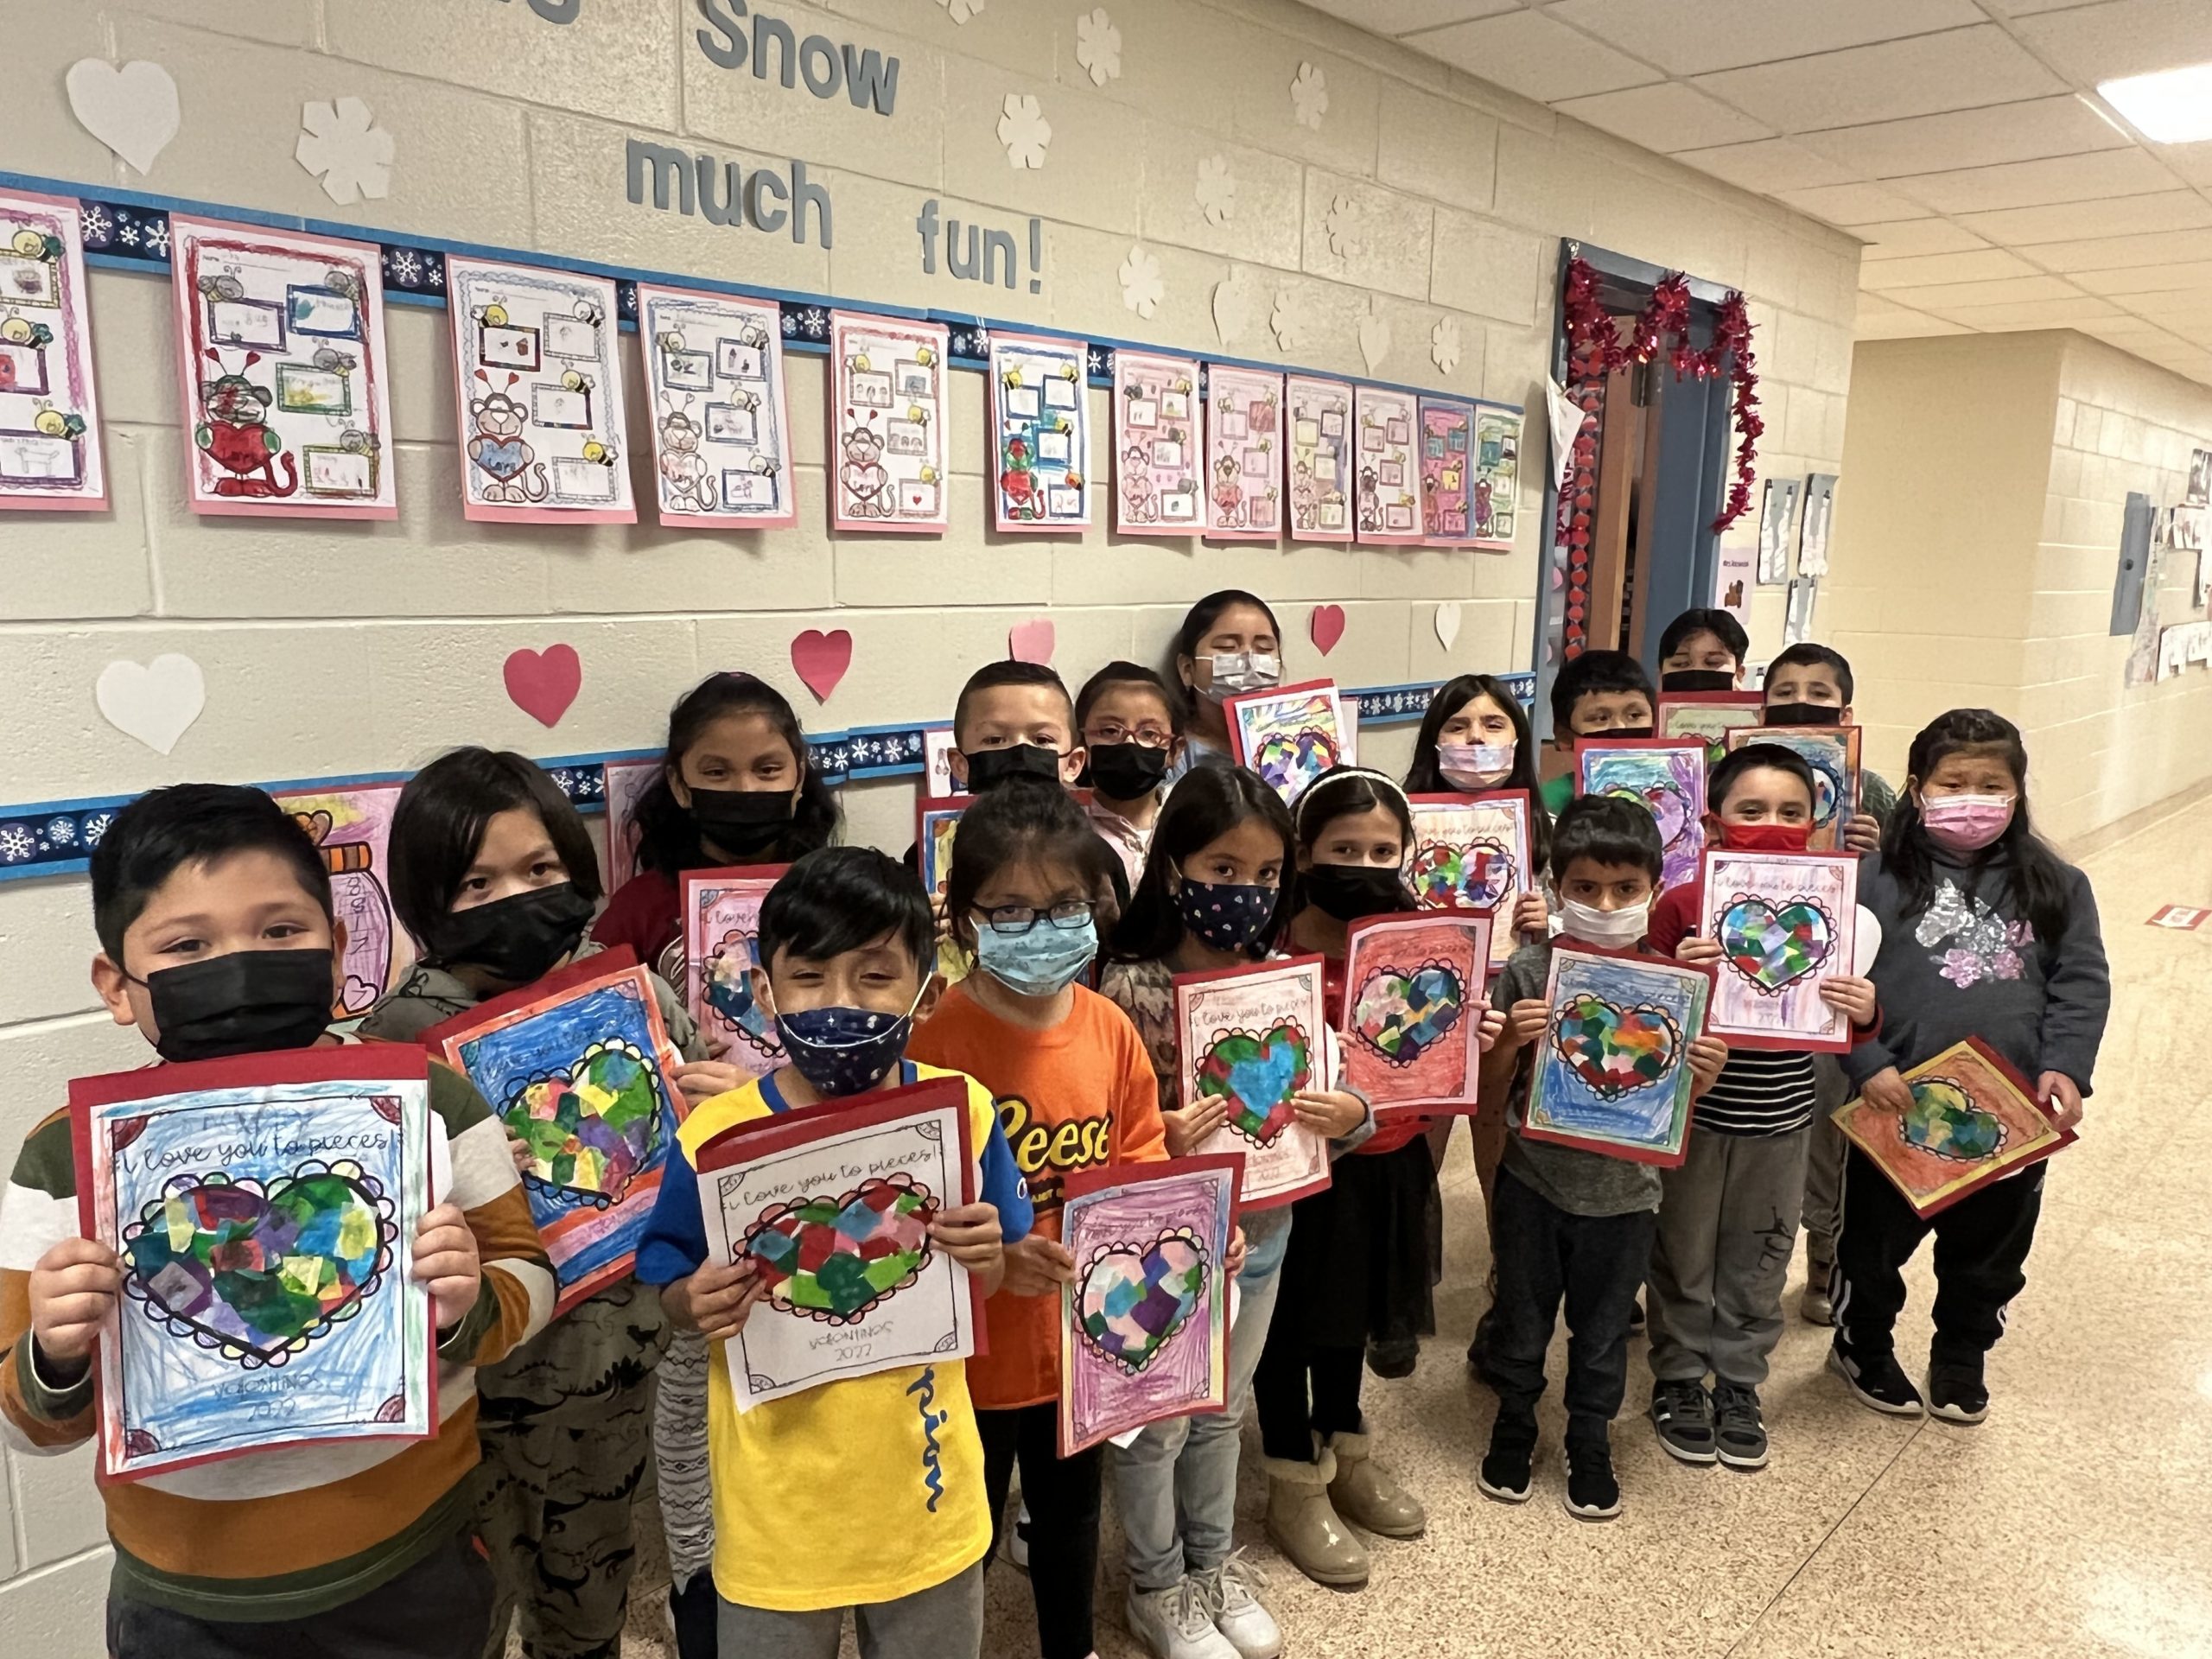 Hampton Bays Elementary School first grade students in Michelle Racywolski’s class recently created drawings with the phrase “I love you to pieces” for their families for Valentine’s Day. Each drawing was adorned with small pieces of paper that students used to form colorful hearts.